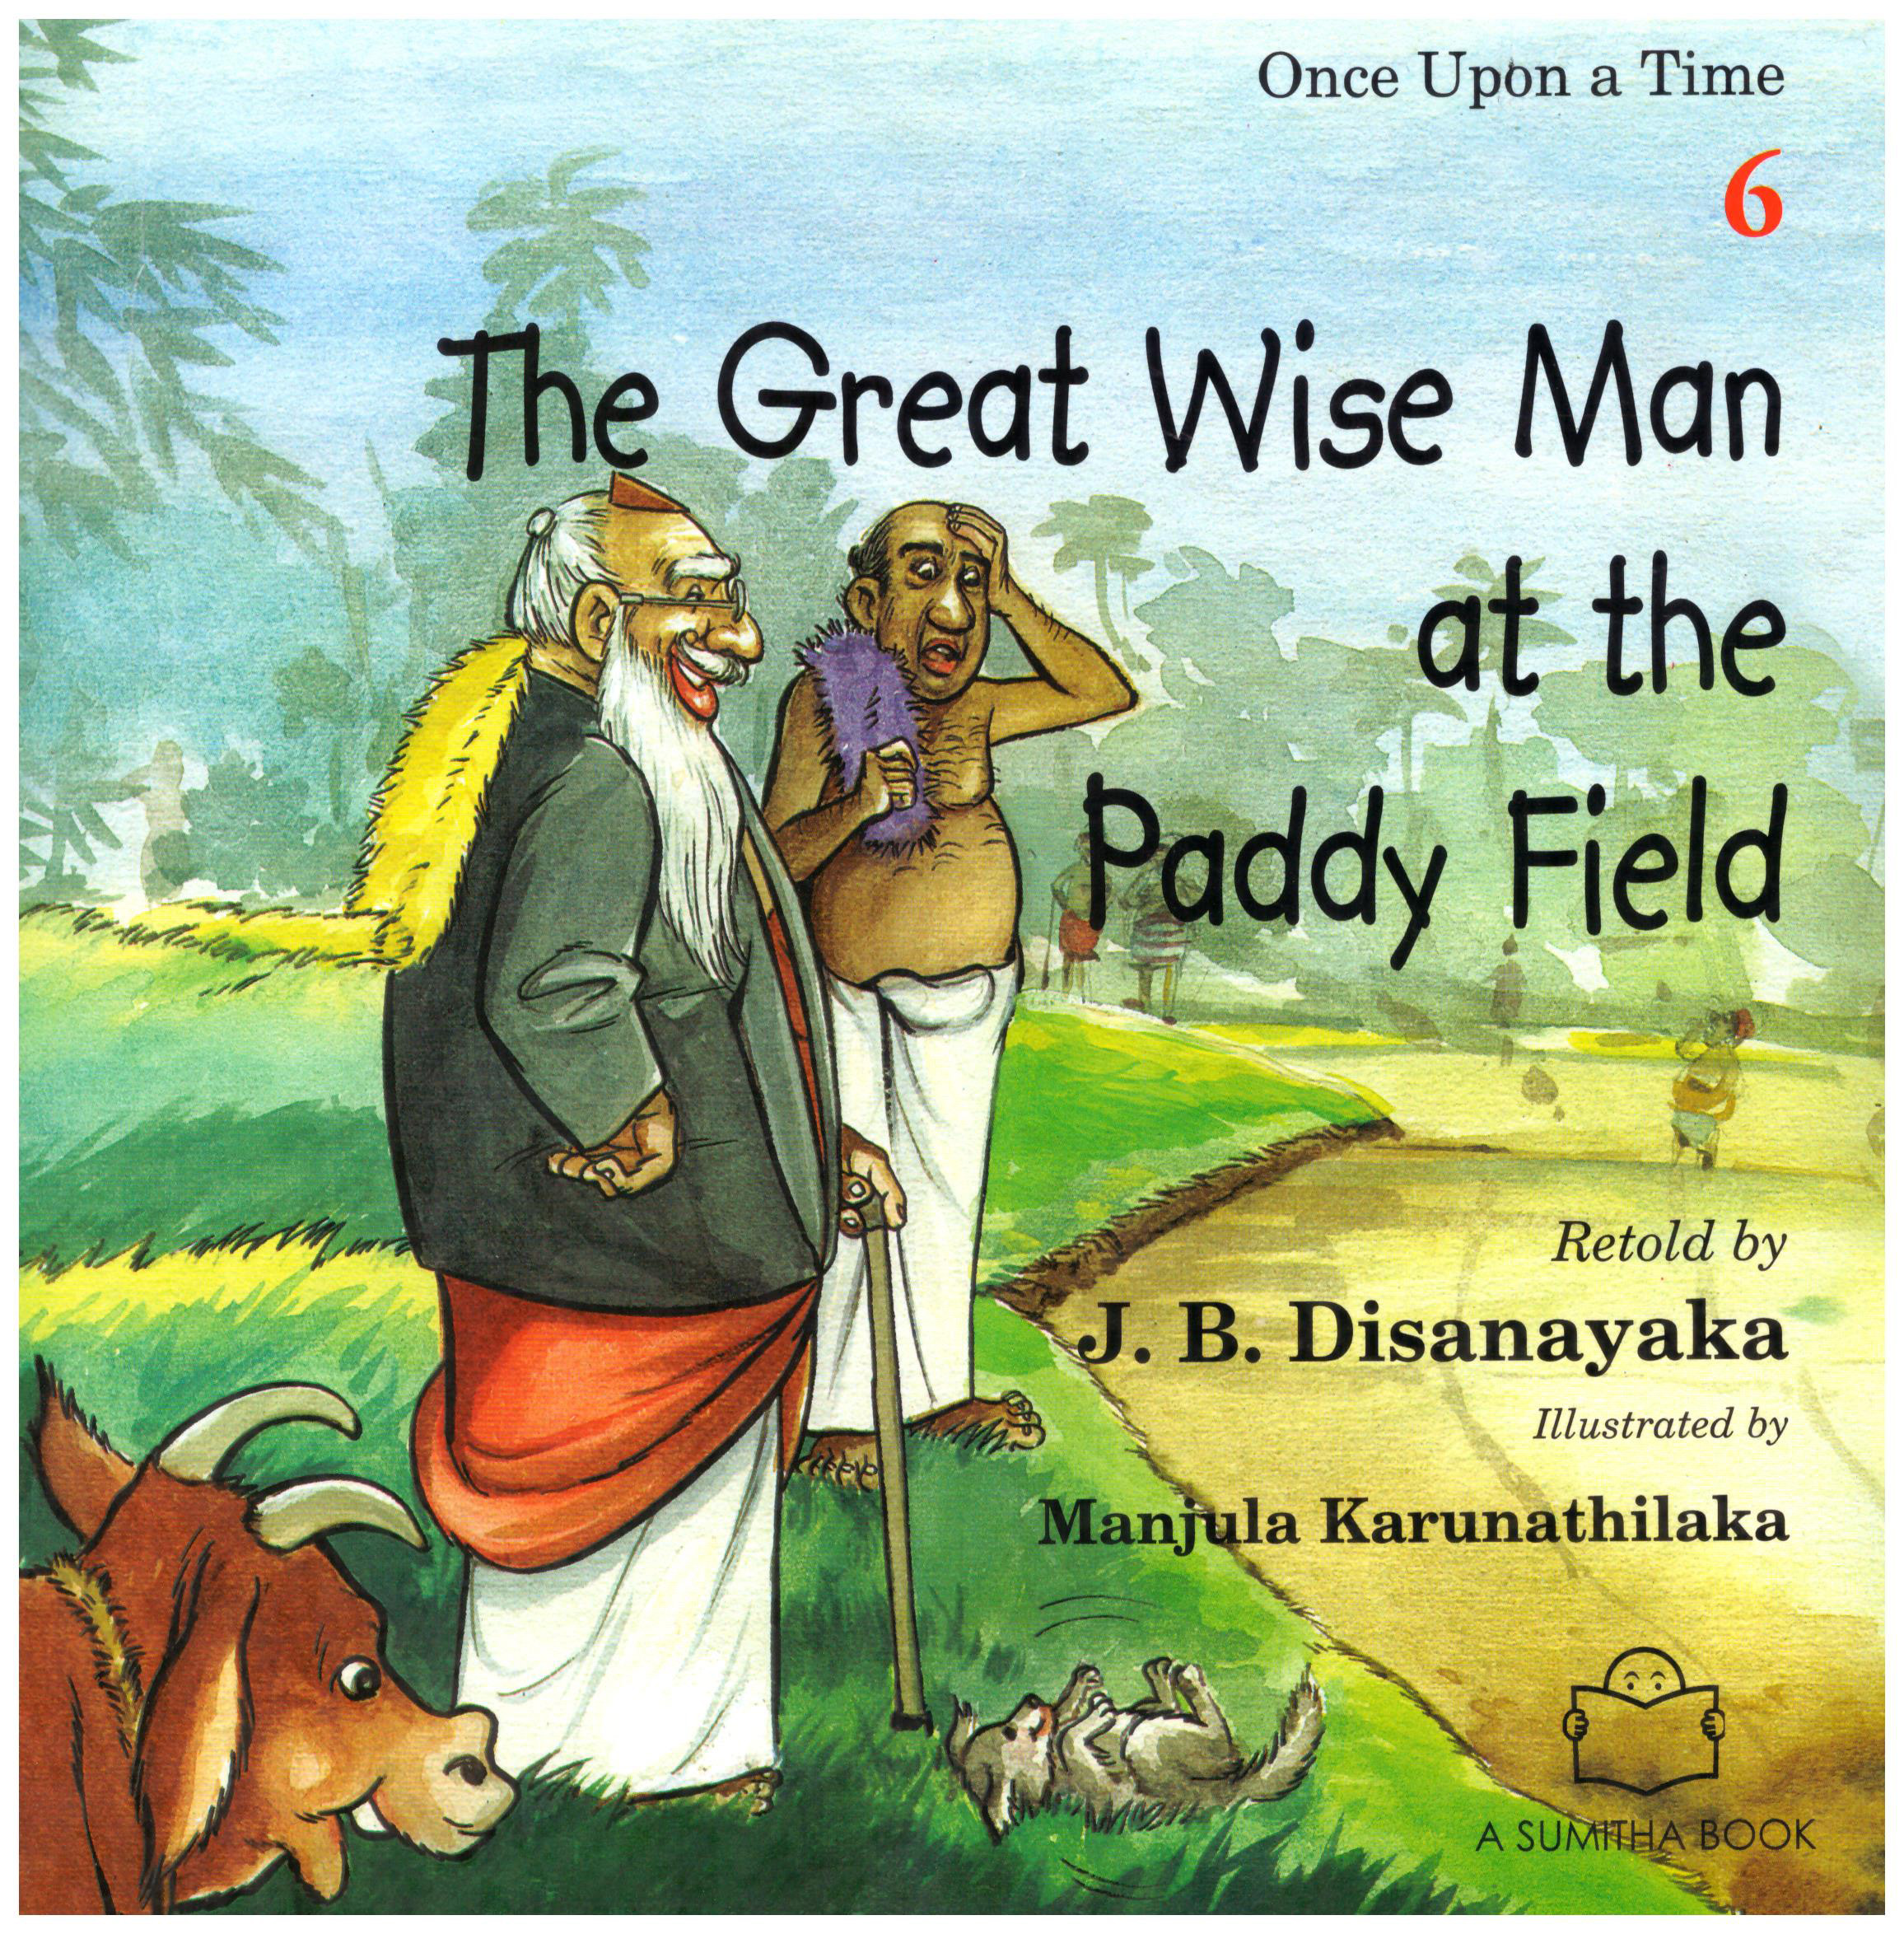 Once Upon a Time 06 - The Great Wise man at the Paddy Field